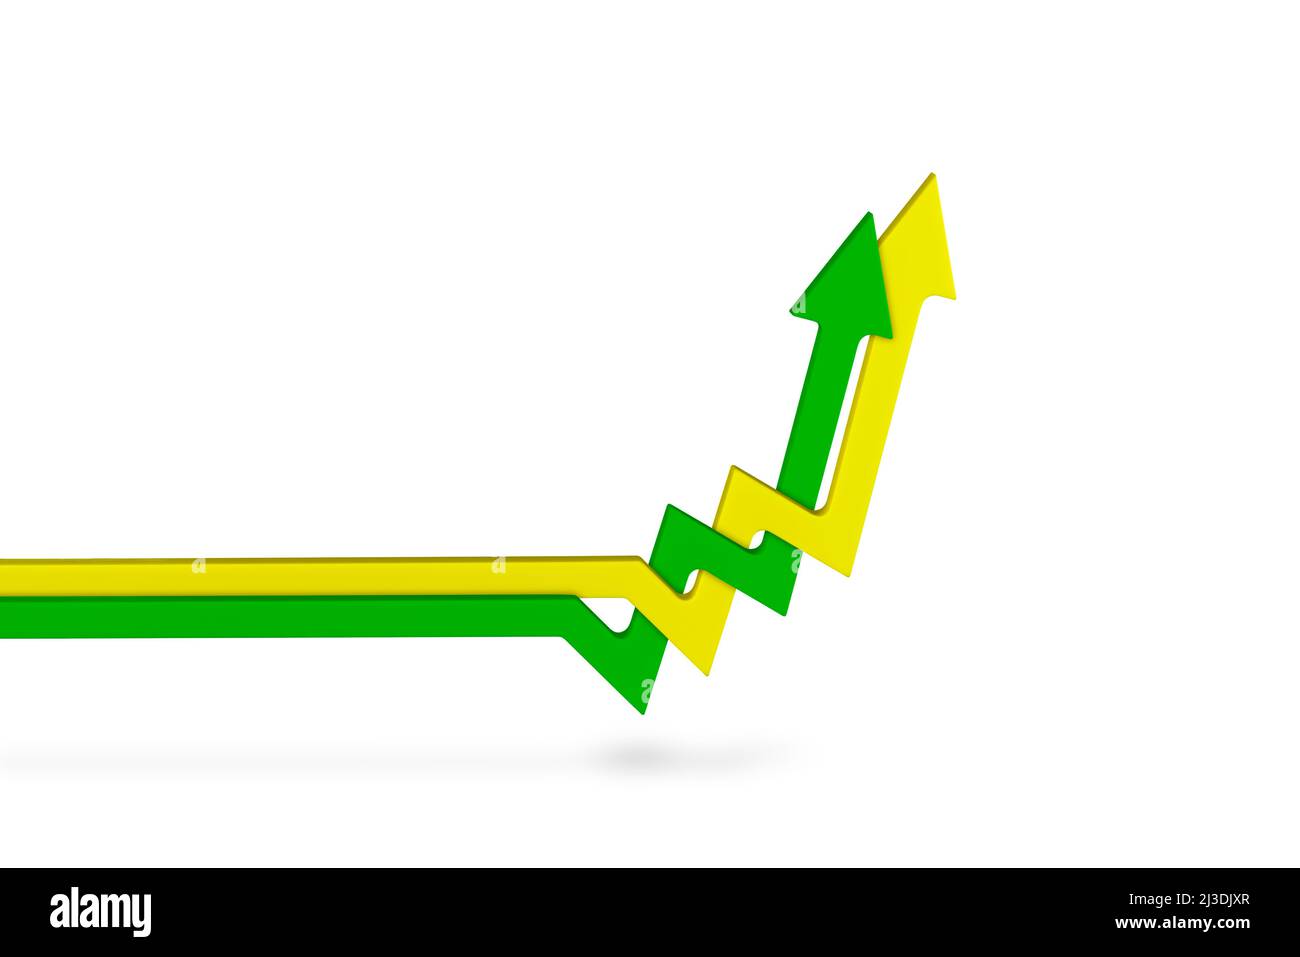 Inflation, rising inflation white isolate. Rising prices. Yellow and green arrows intertwined on the chart pointing up, white background. Growth Stock Photo